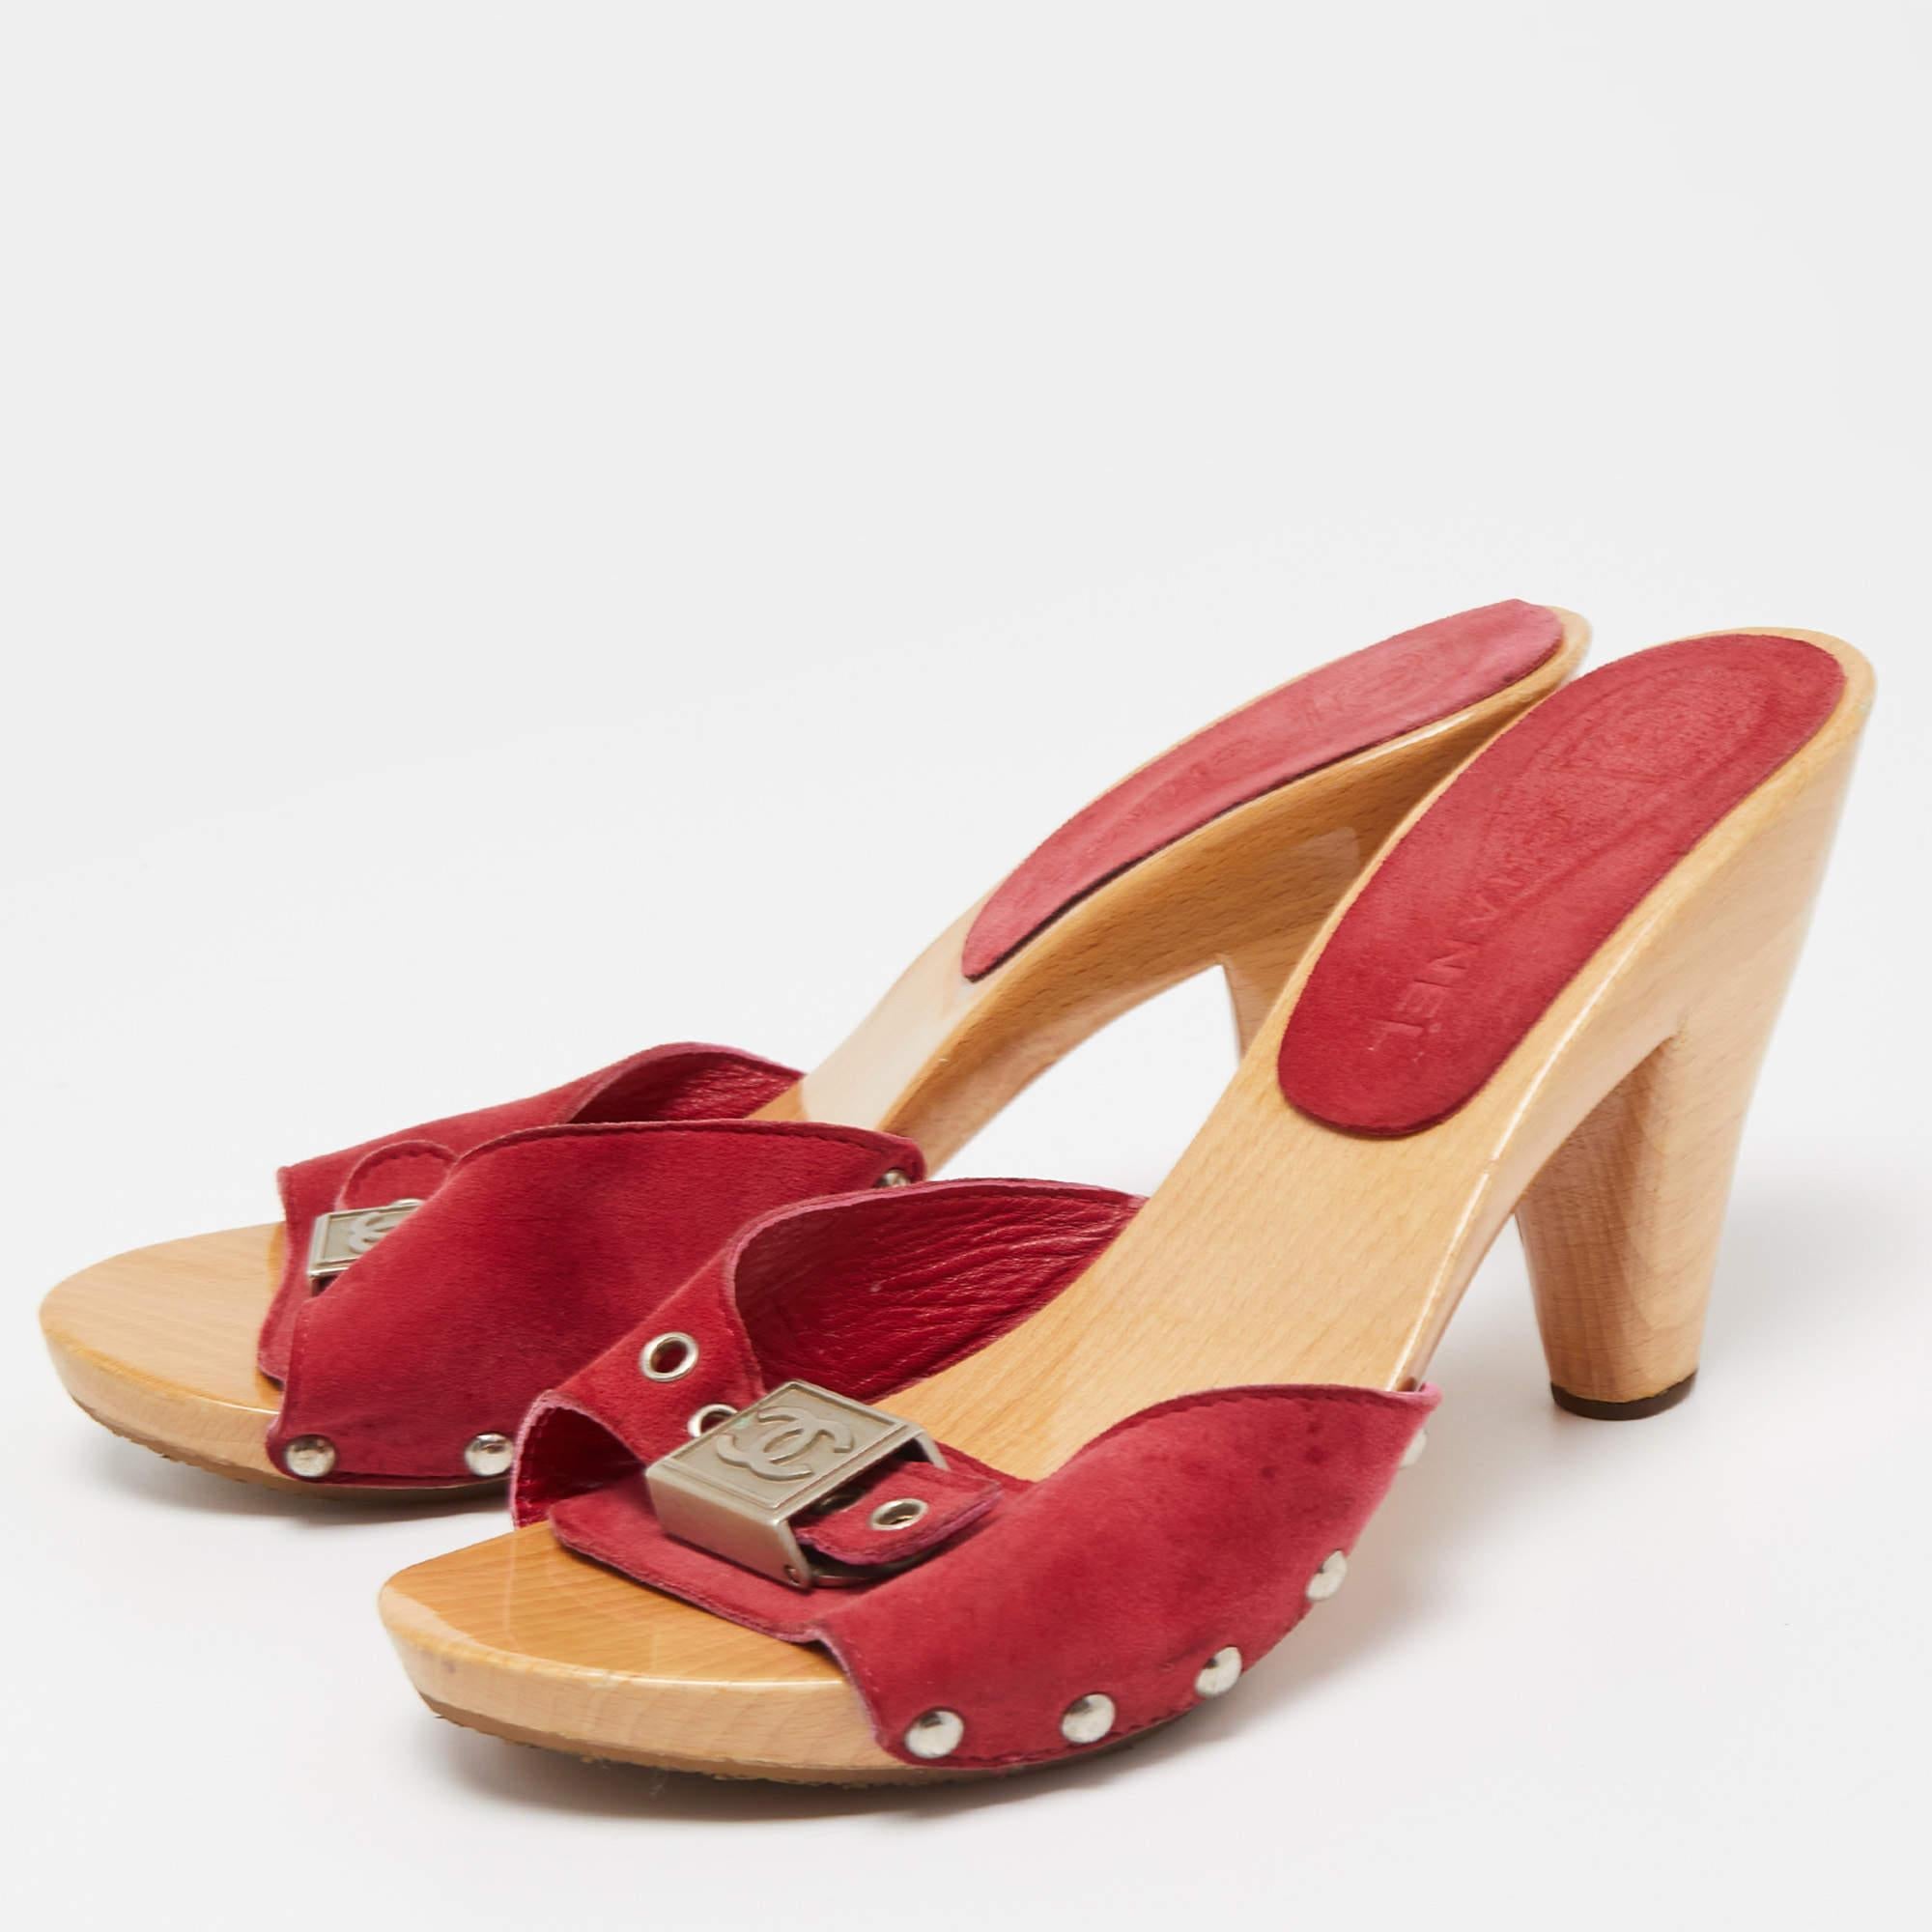 Chunky in design, these luxurious clogs exemplify the label's artistry in shoemaking. Bringing a stylish silhouette, they can be easily styled with flared pants, skirts, and dresses.

